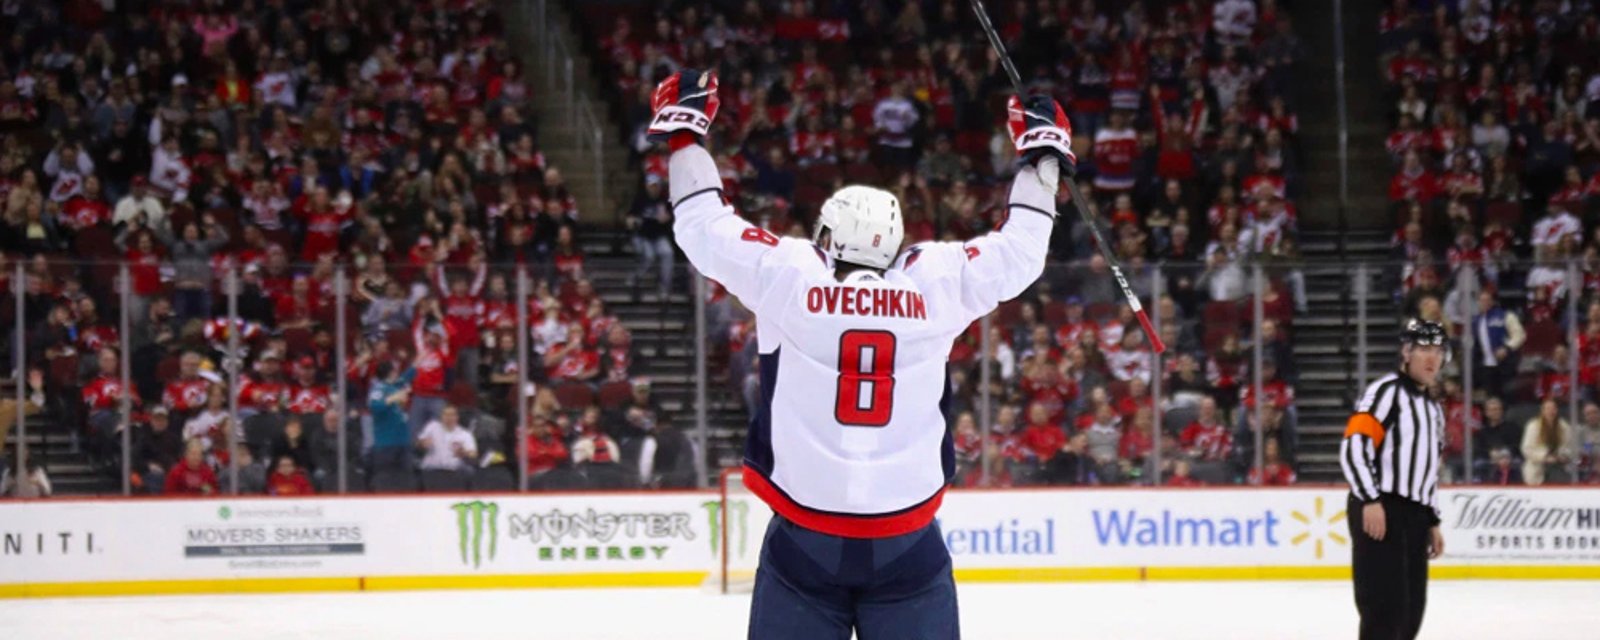 Devils personally deliver a gift to Ovechkin for his 700th career NHL goal